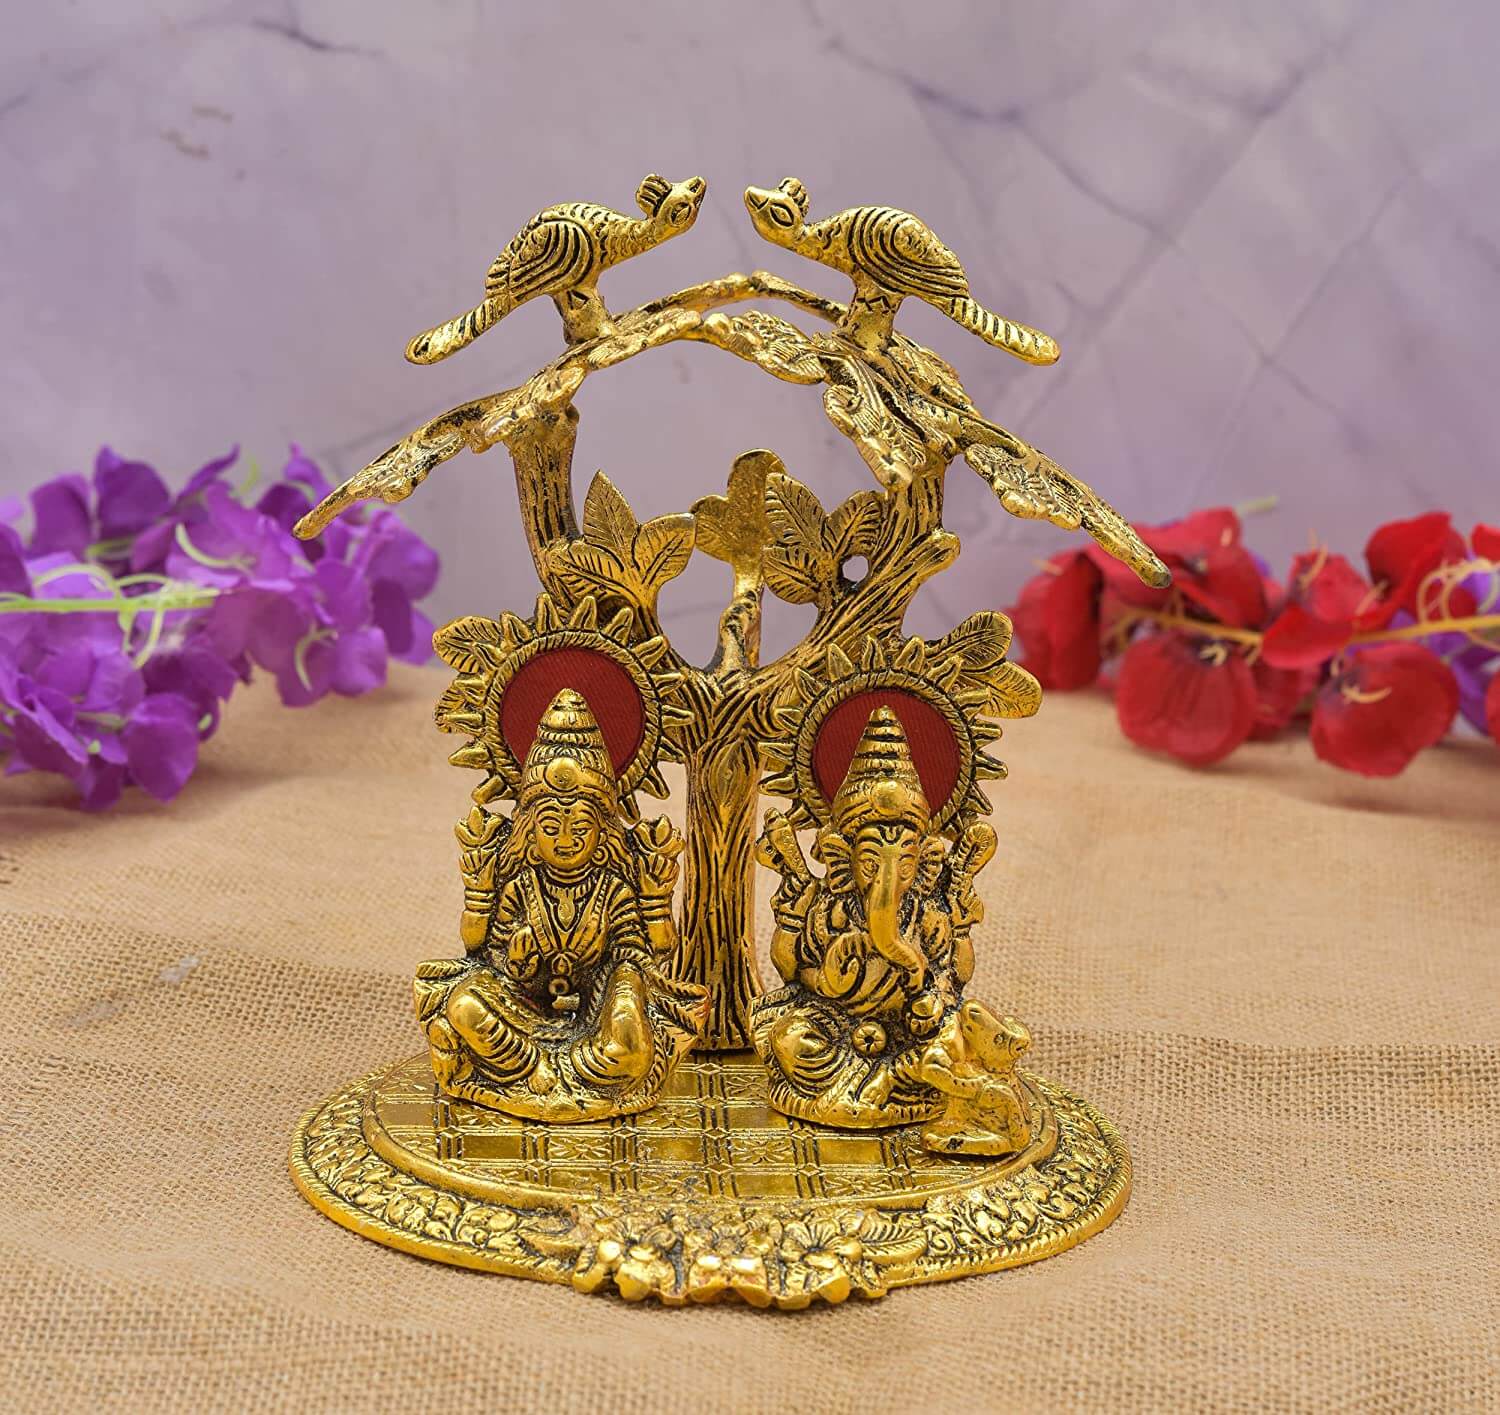 GOLDGIFTIDEAS 12 Inch Shubh Labh Silver Plated Pooja Thali Set for Gift